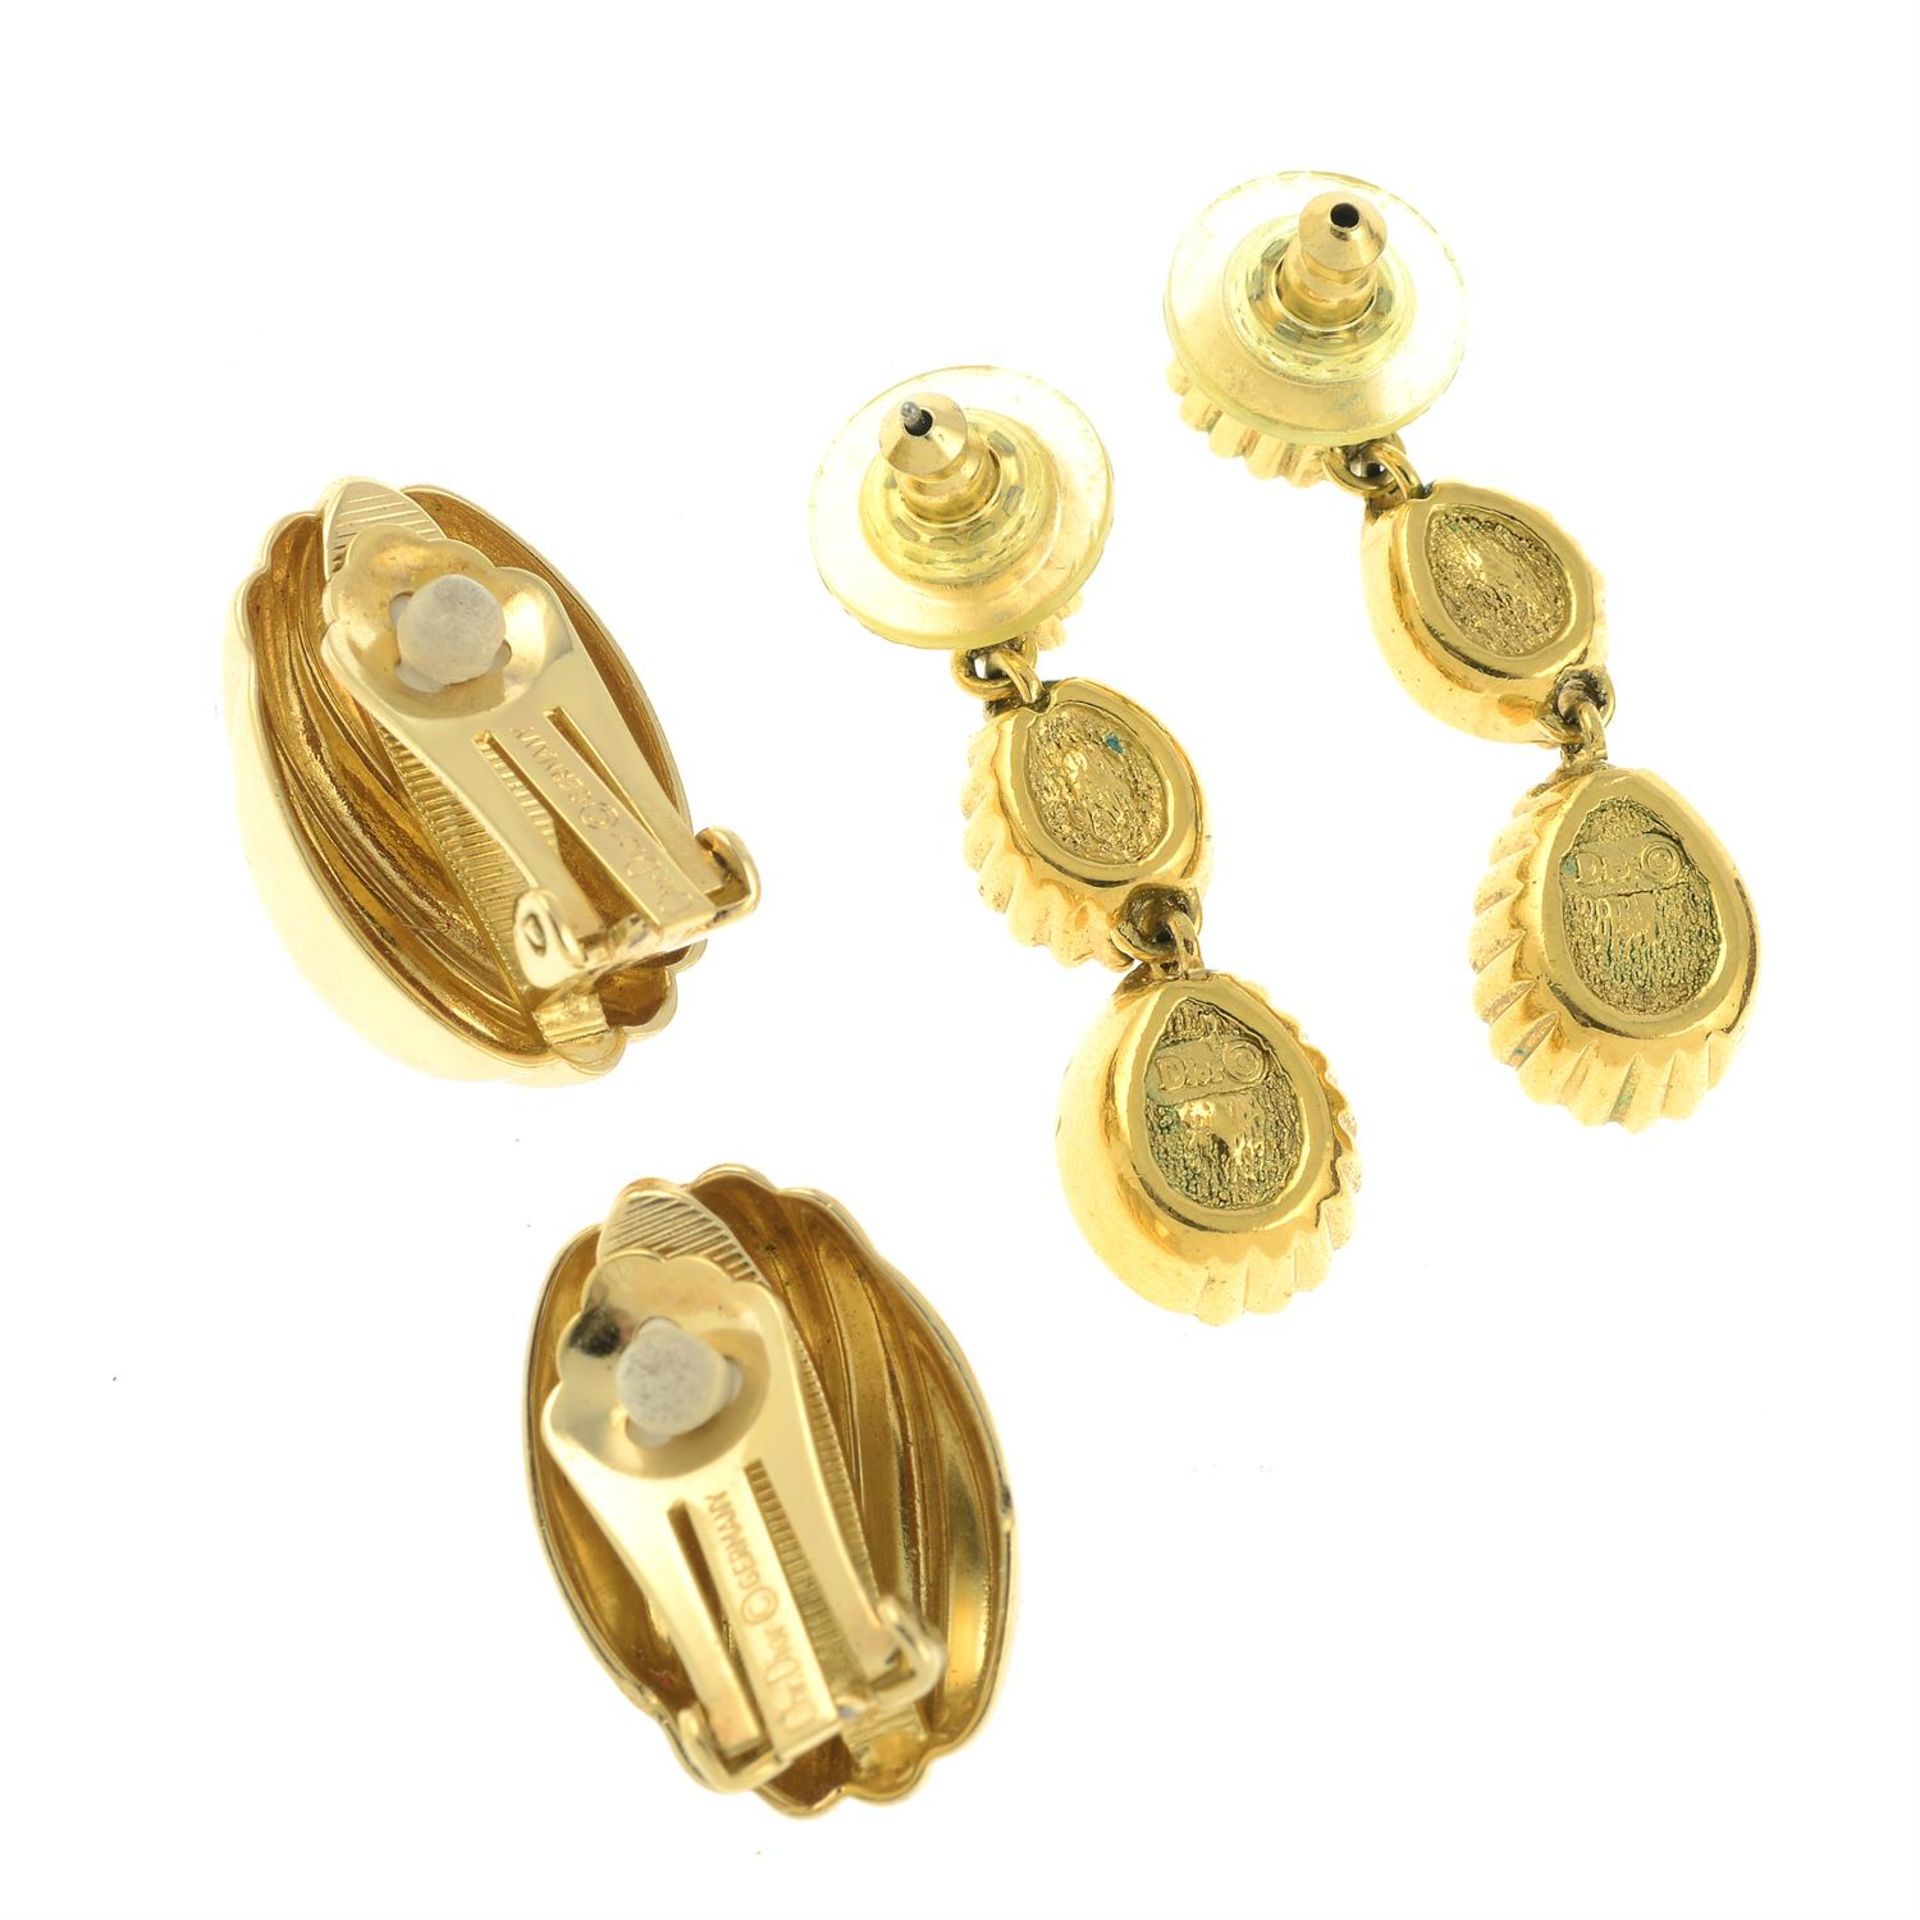 CHRISTIAN DIOR - two pairs of earrings. - Image 2 of 2